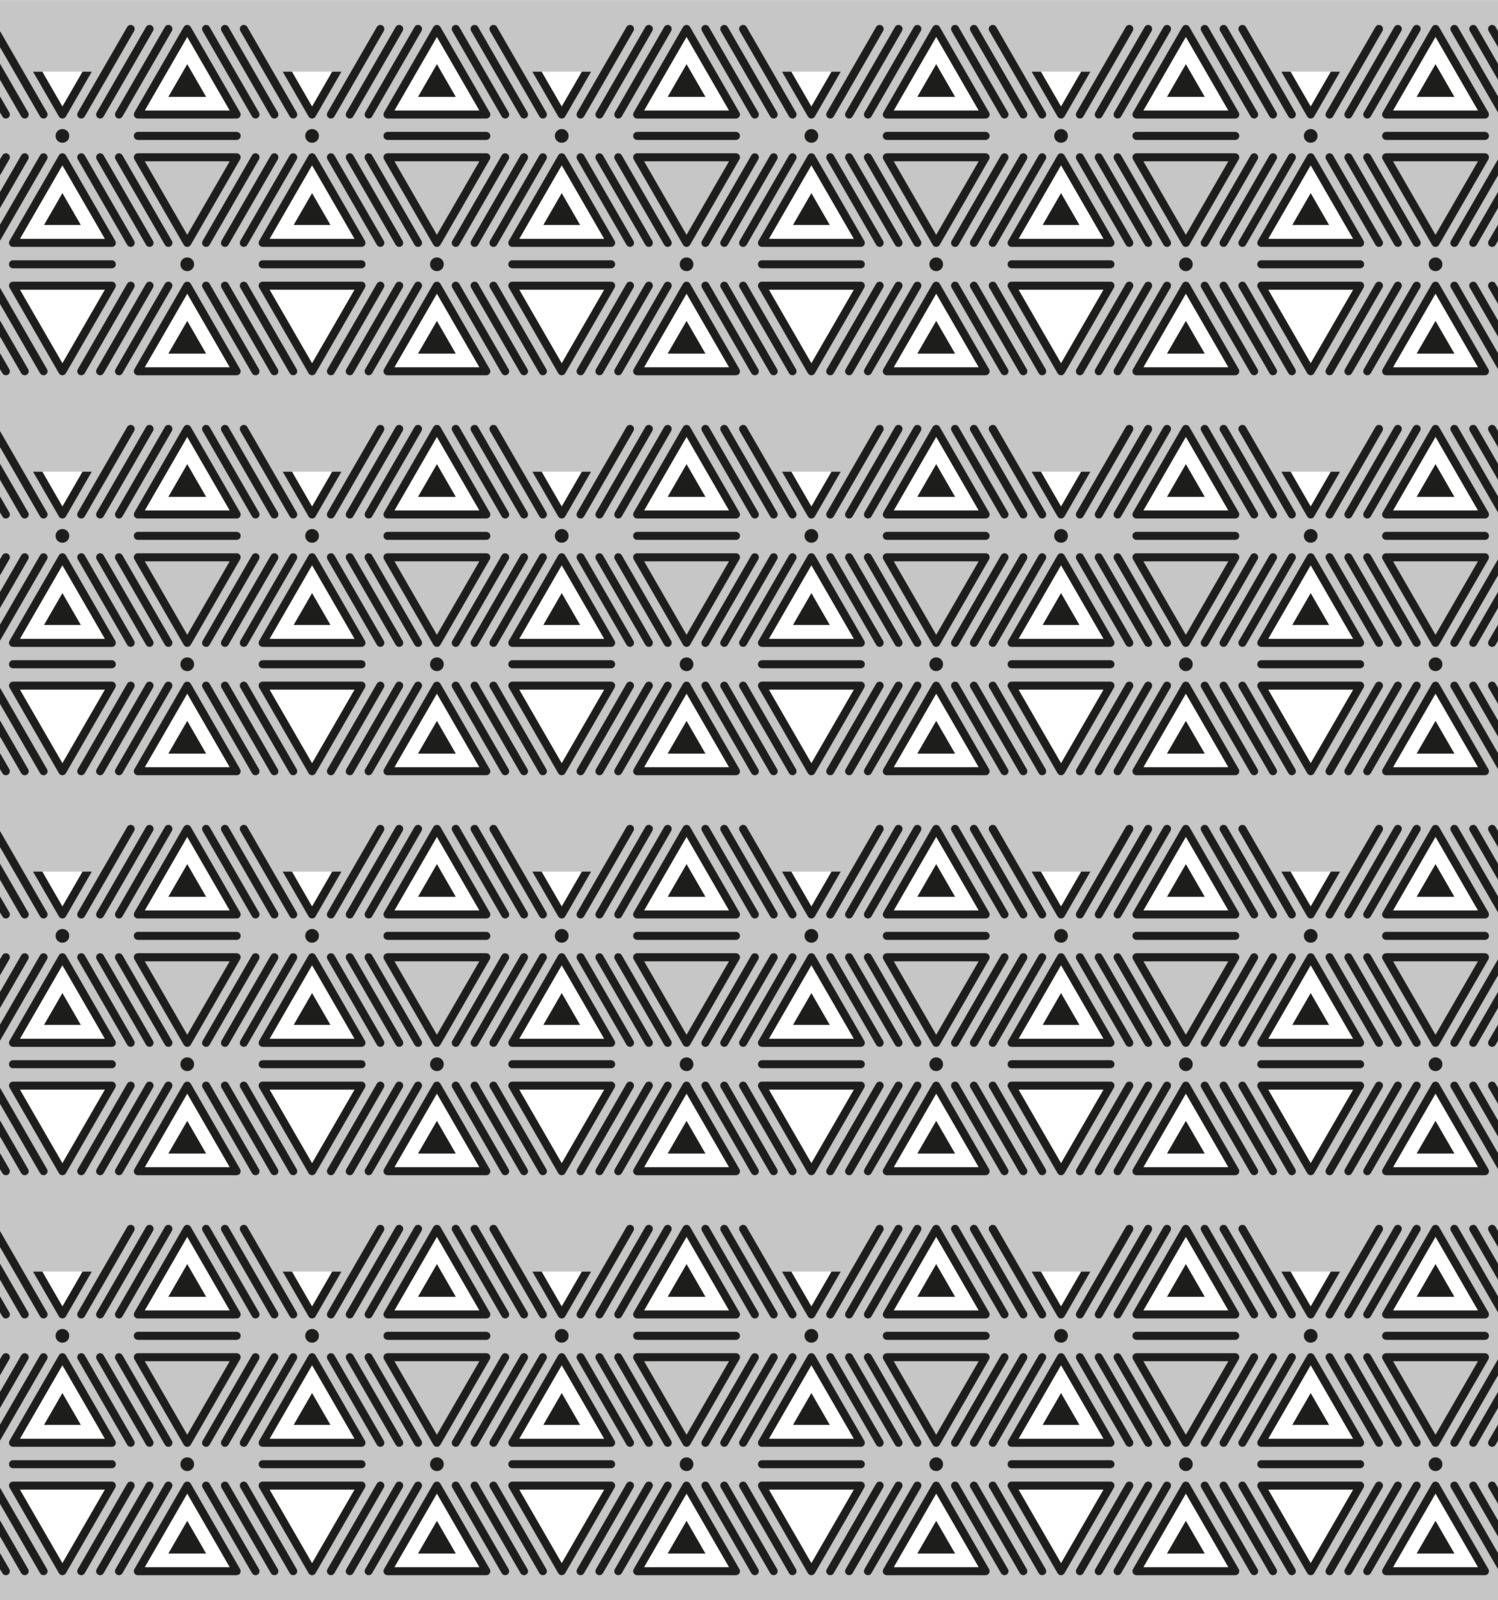 American ethnic indigenous Seamless art triangles pattern by infinityyy